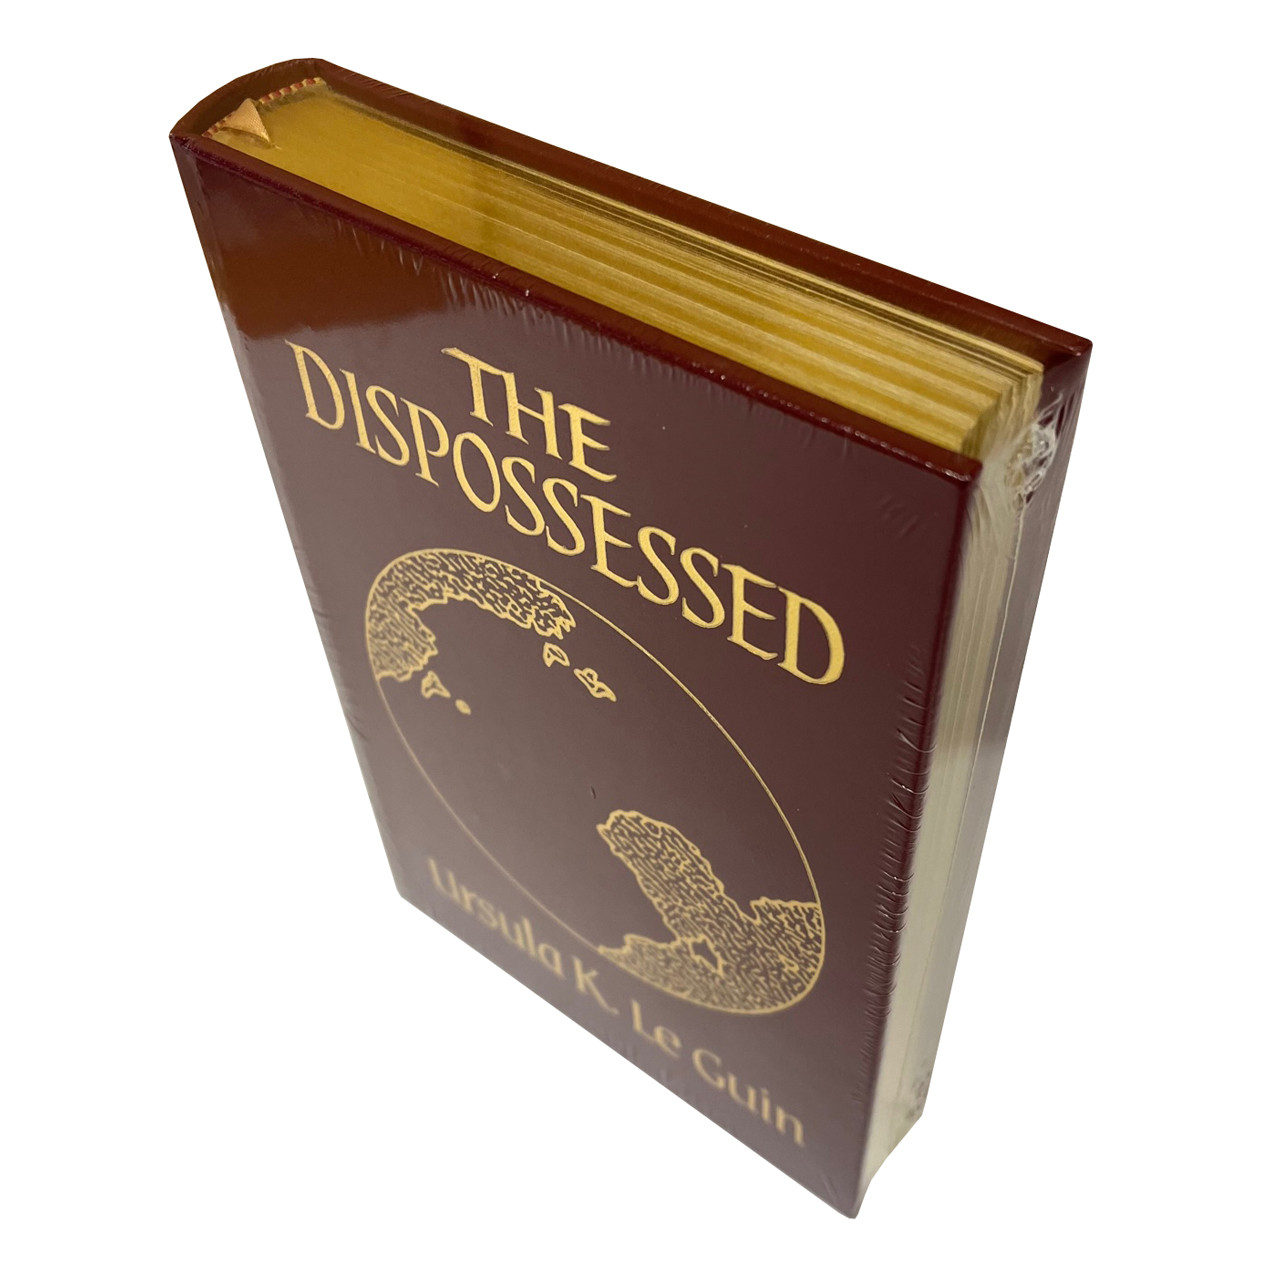 Ursula K. Le Guin "The Dispossessed" Limited Edition, Leather Bound Collector's Edition [Sealed]